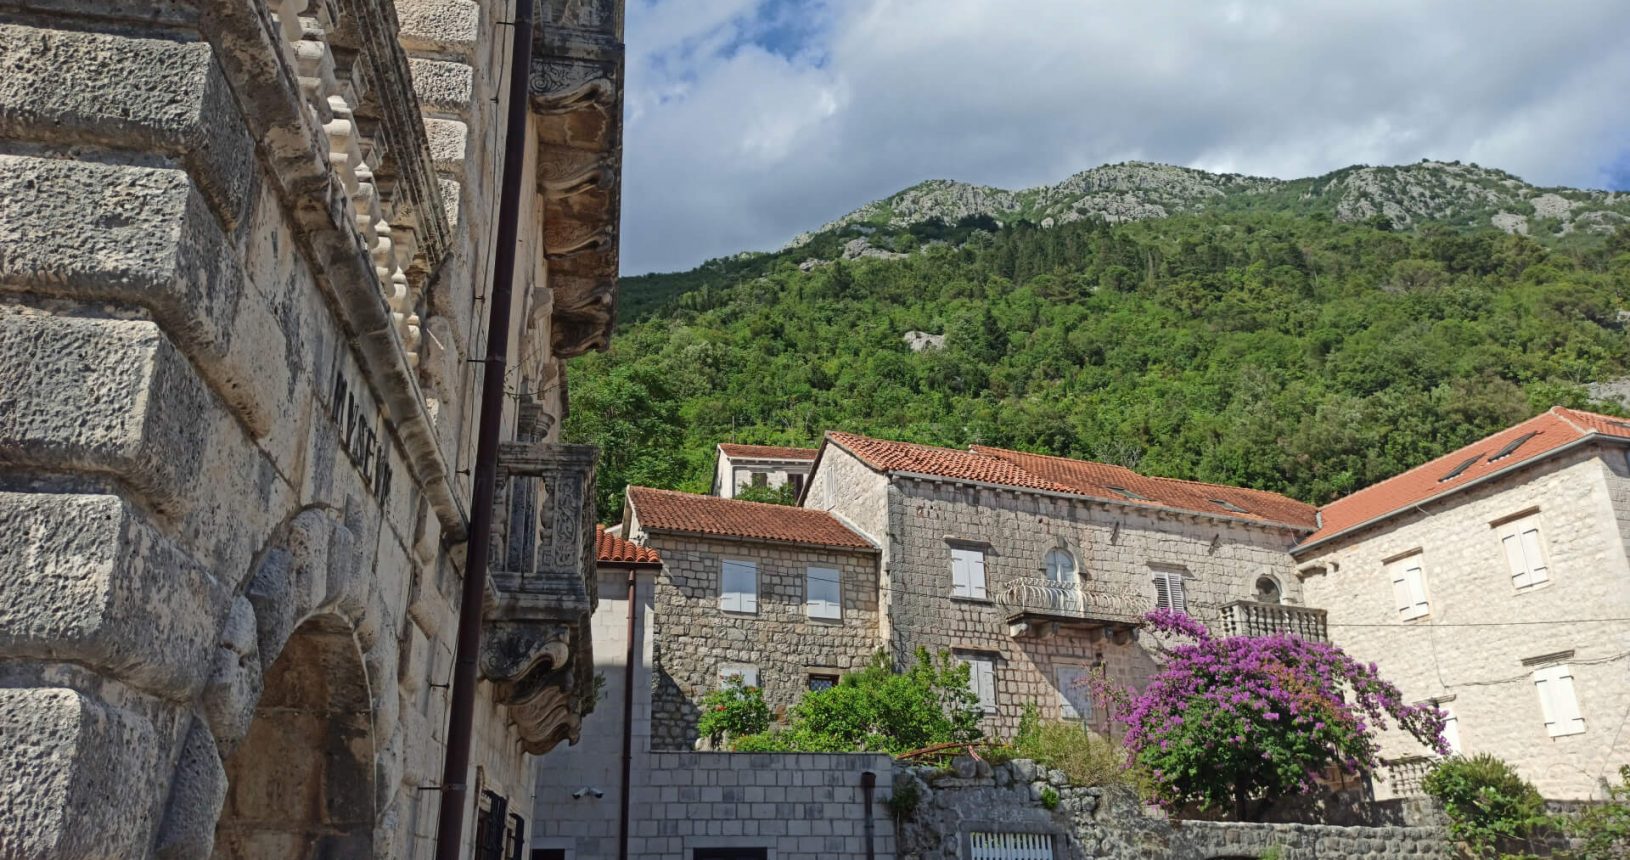 The beauty of old buildings Perast